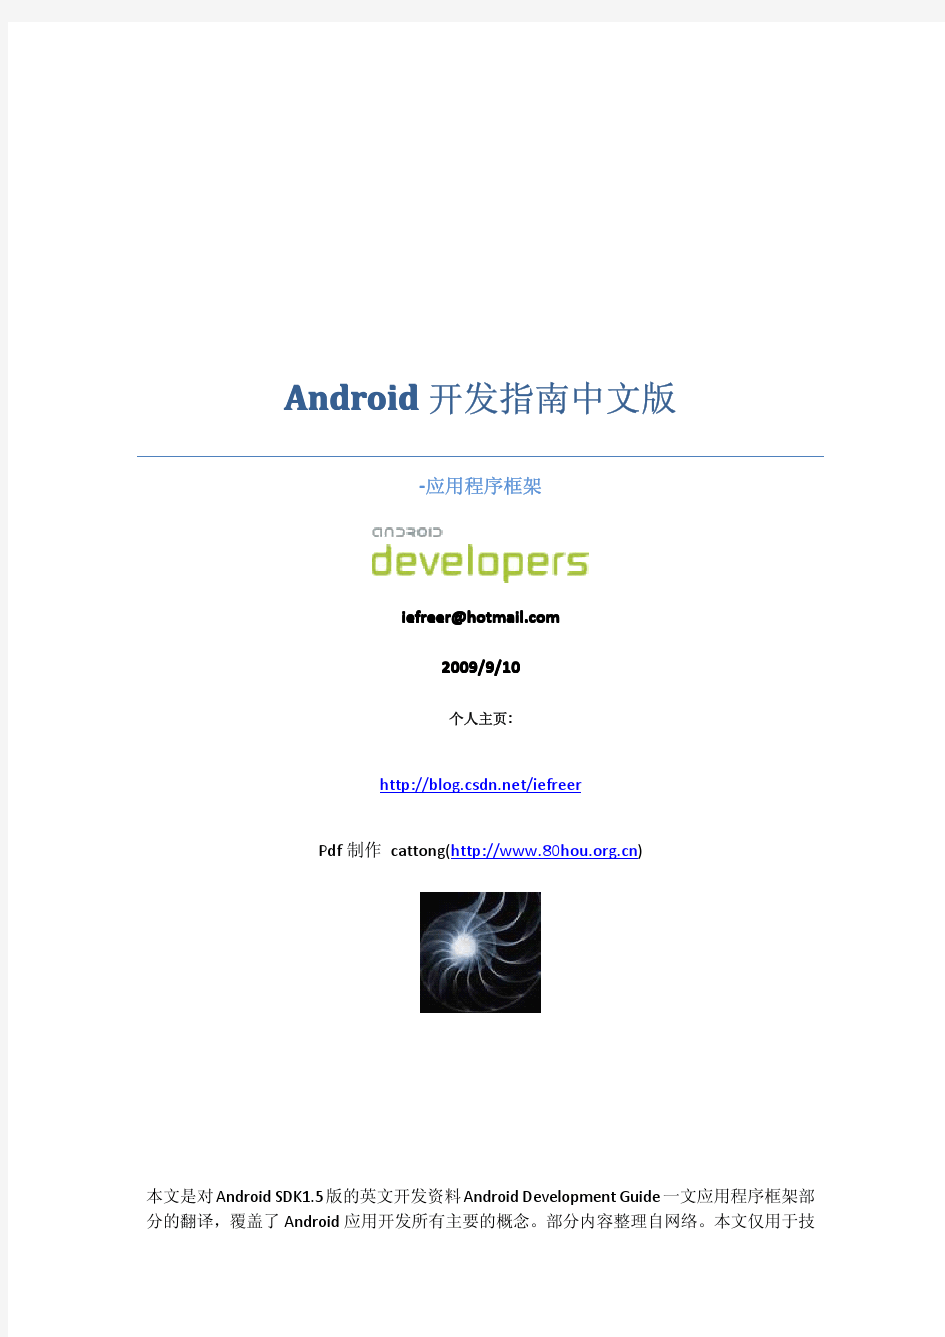 Android_开发指南中文版